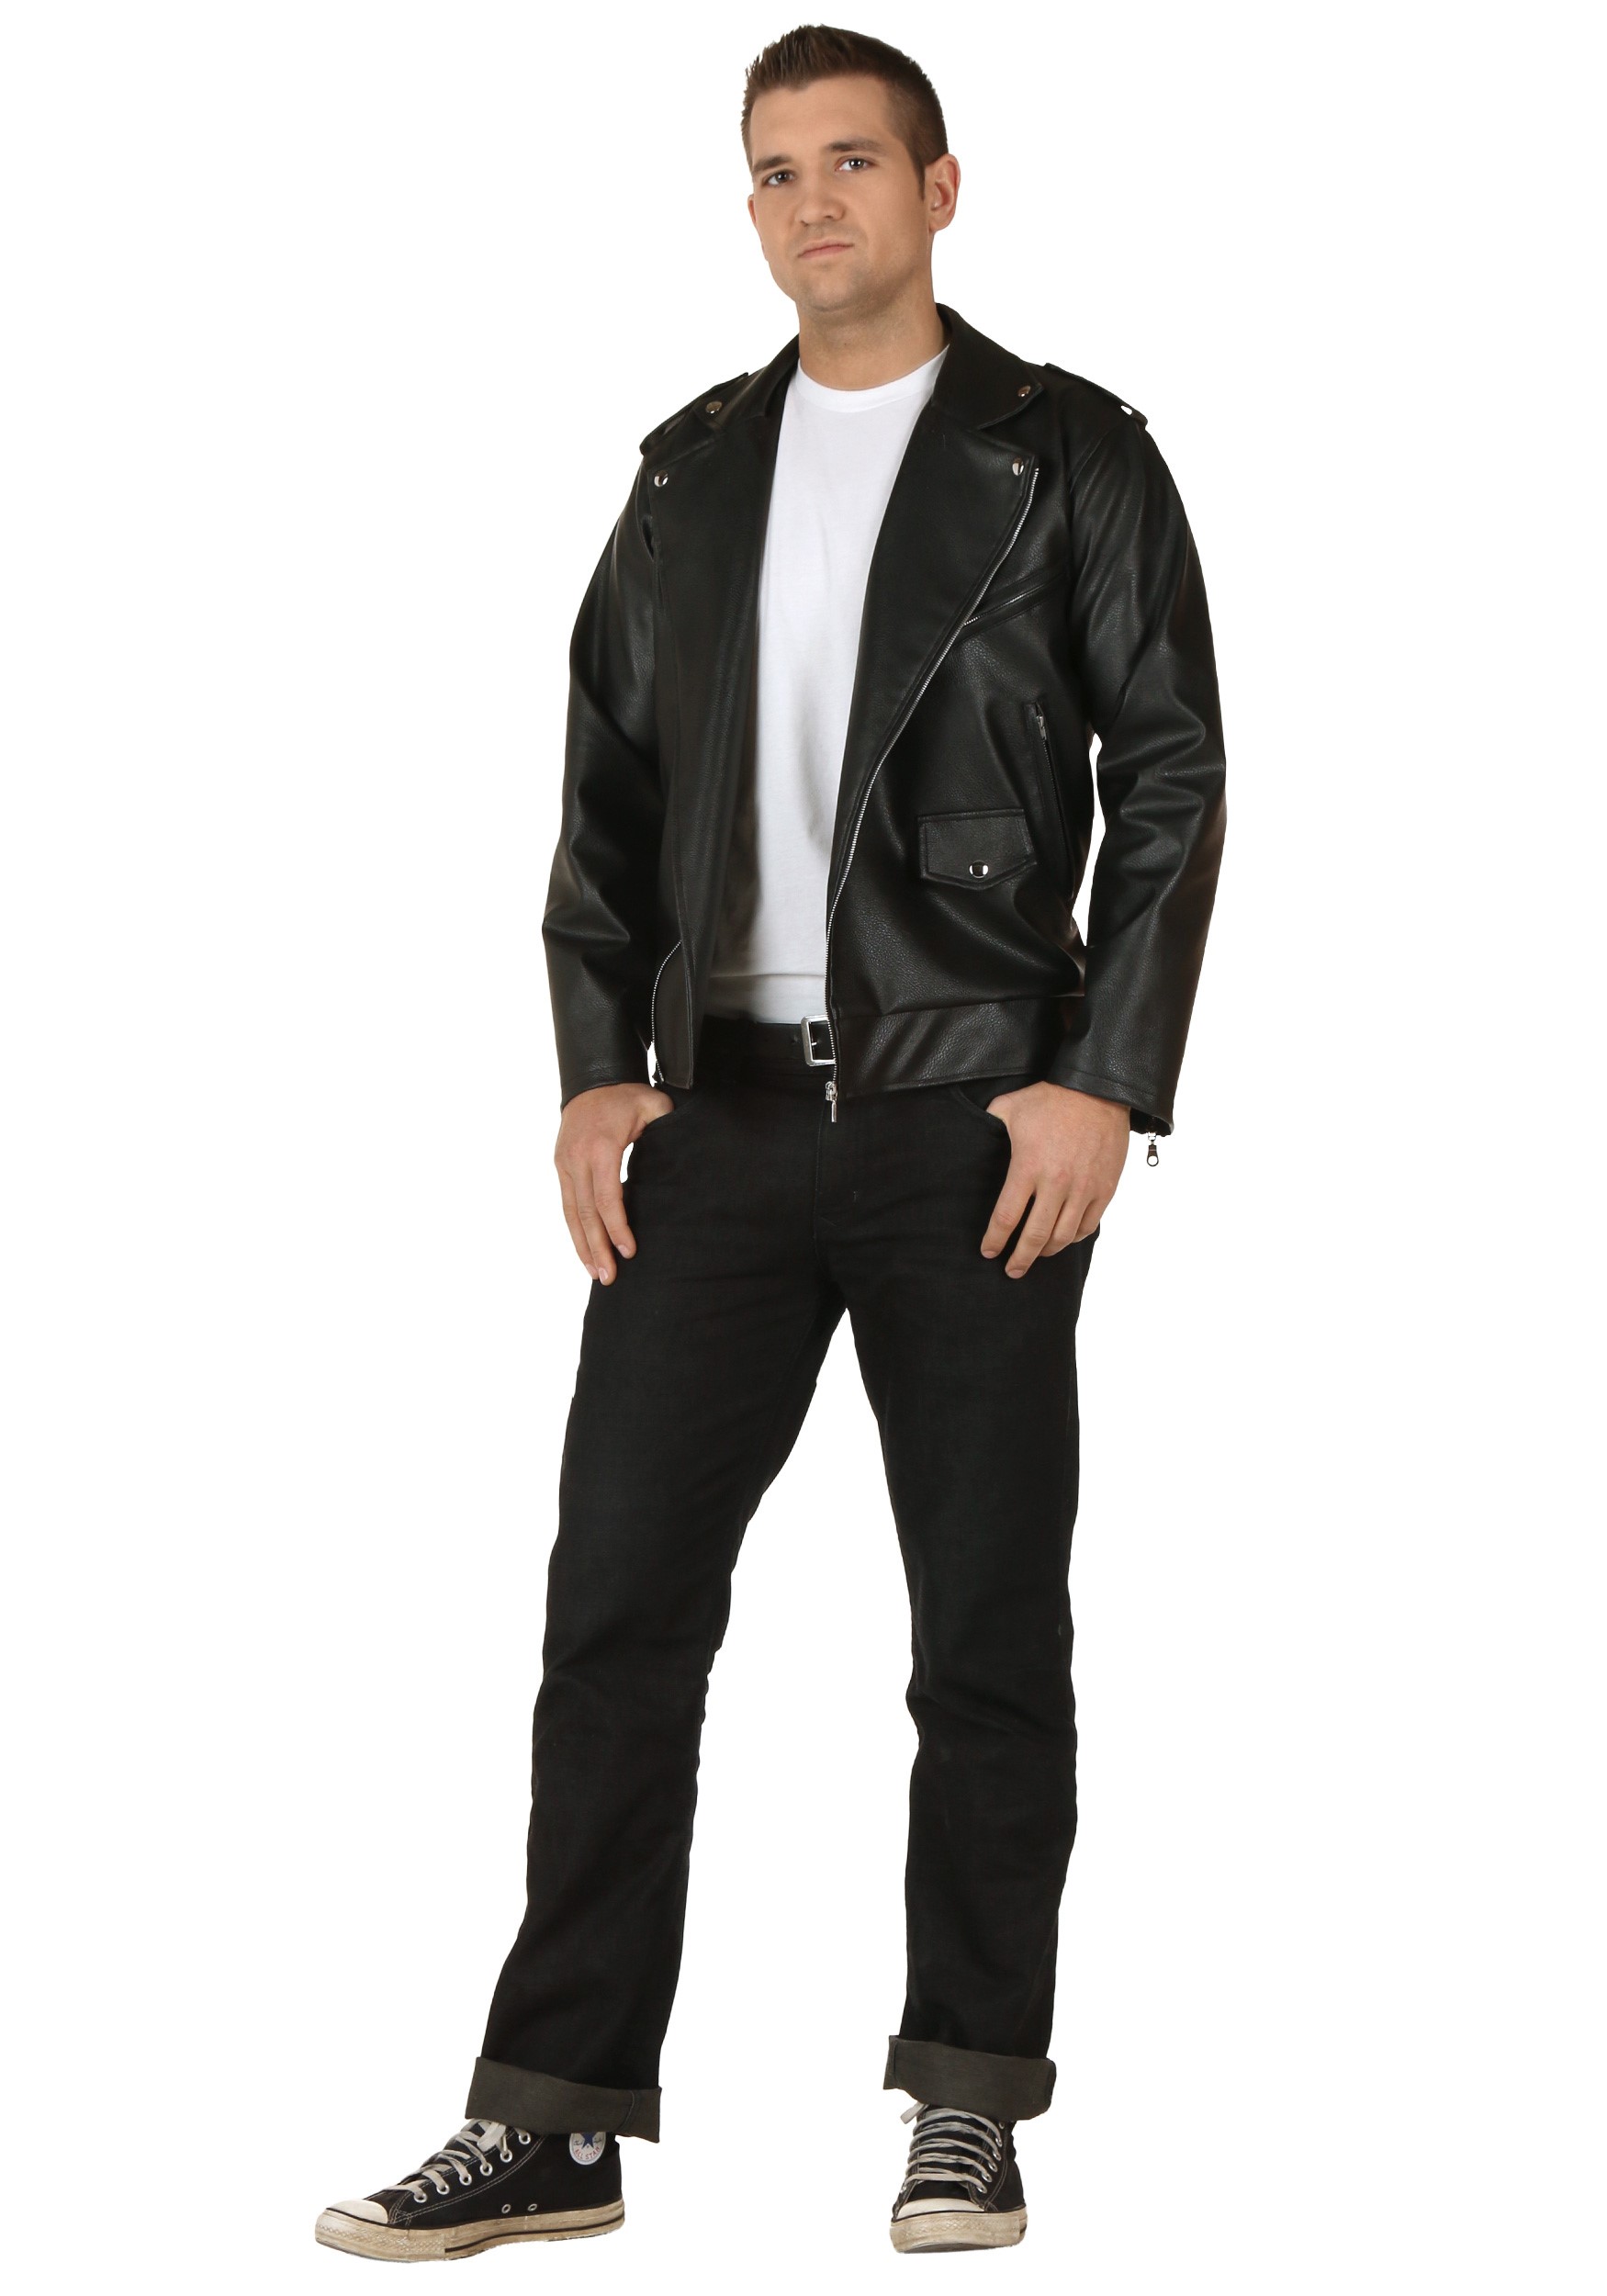 Photos - Fancy Dress FUN Costumes Plus Size Grease Authentic T-Birds Jacket Costume | Exclusive